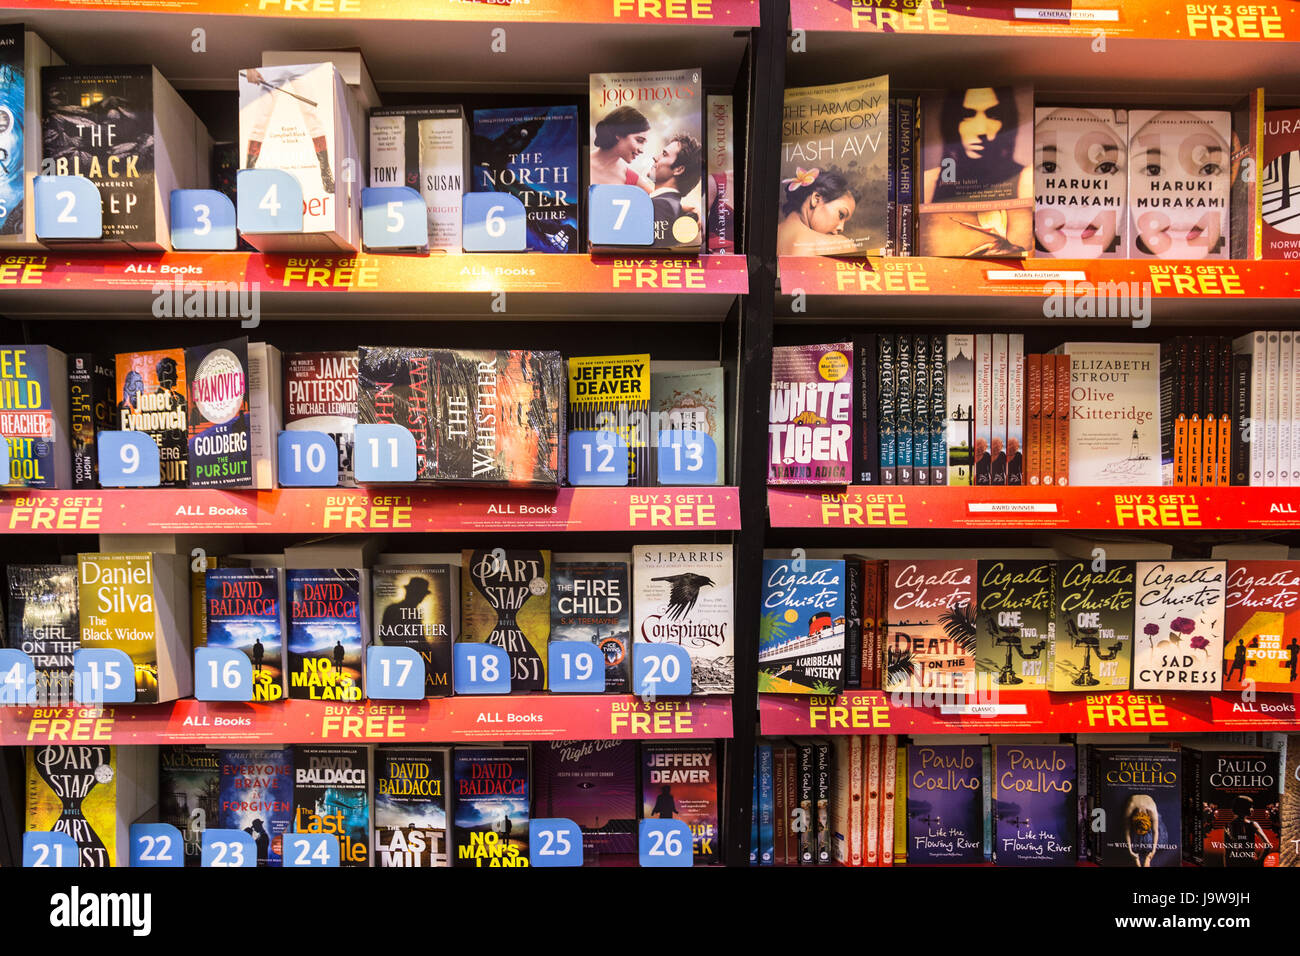 KUALA LUMPUR, MALAYSIA - MAY 19, 2017: Best seller novel books, including from Murakami, are displayed in a bookstore in an airport. Stock Photo